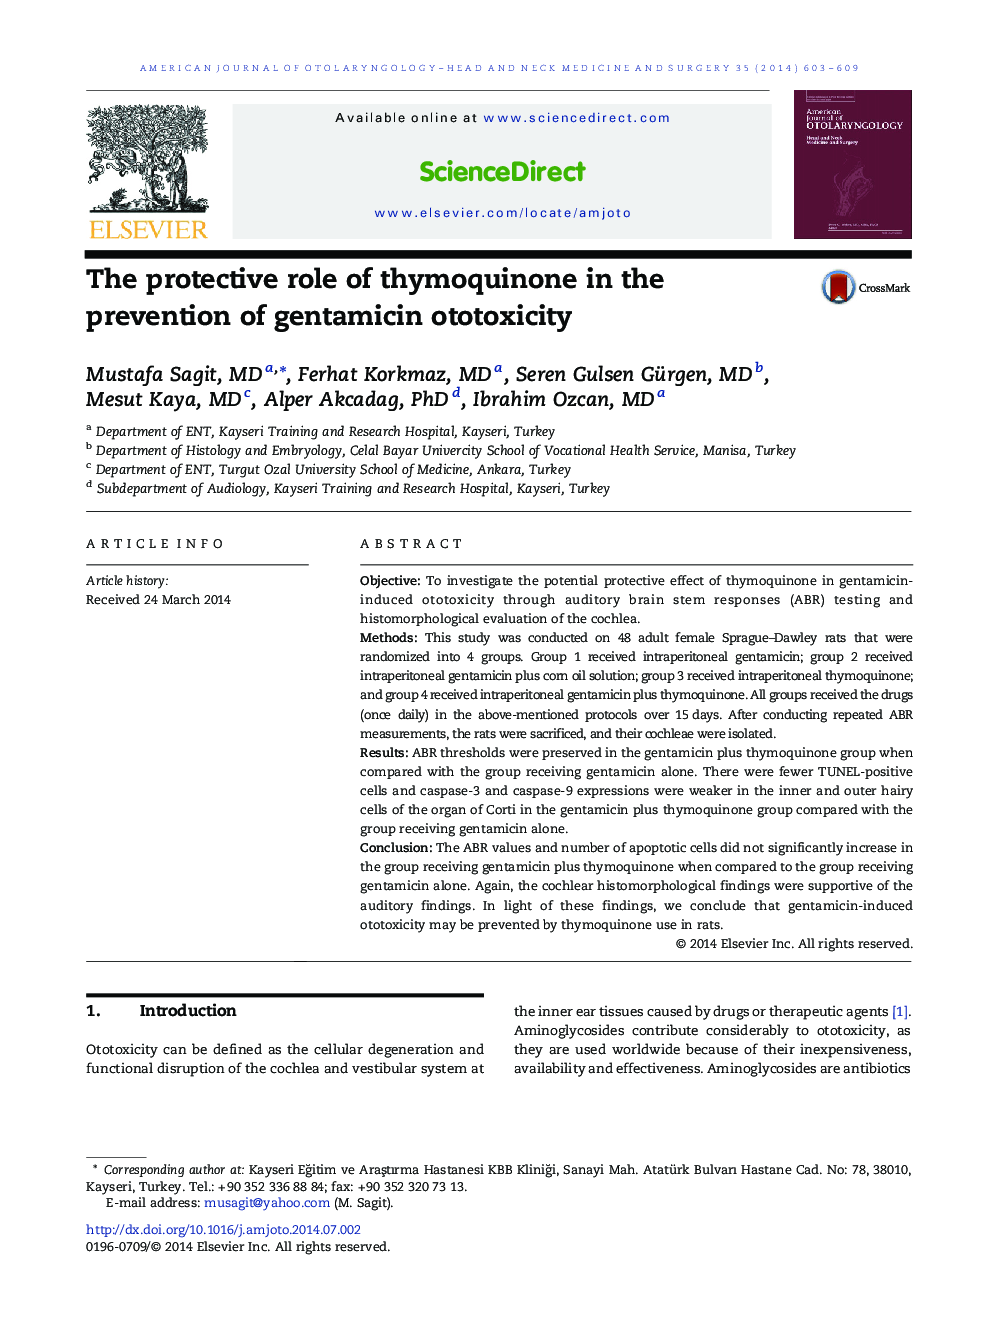 The protective role of thymoquinone in the prevention of gentamicin ototoxicity